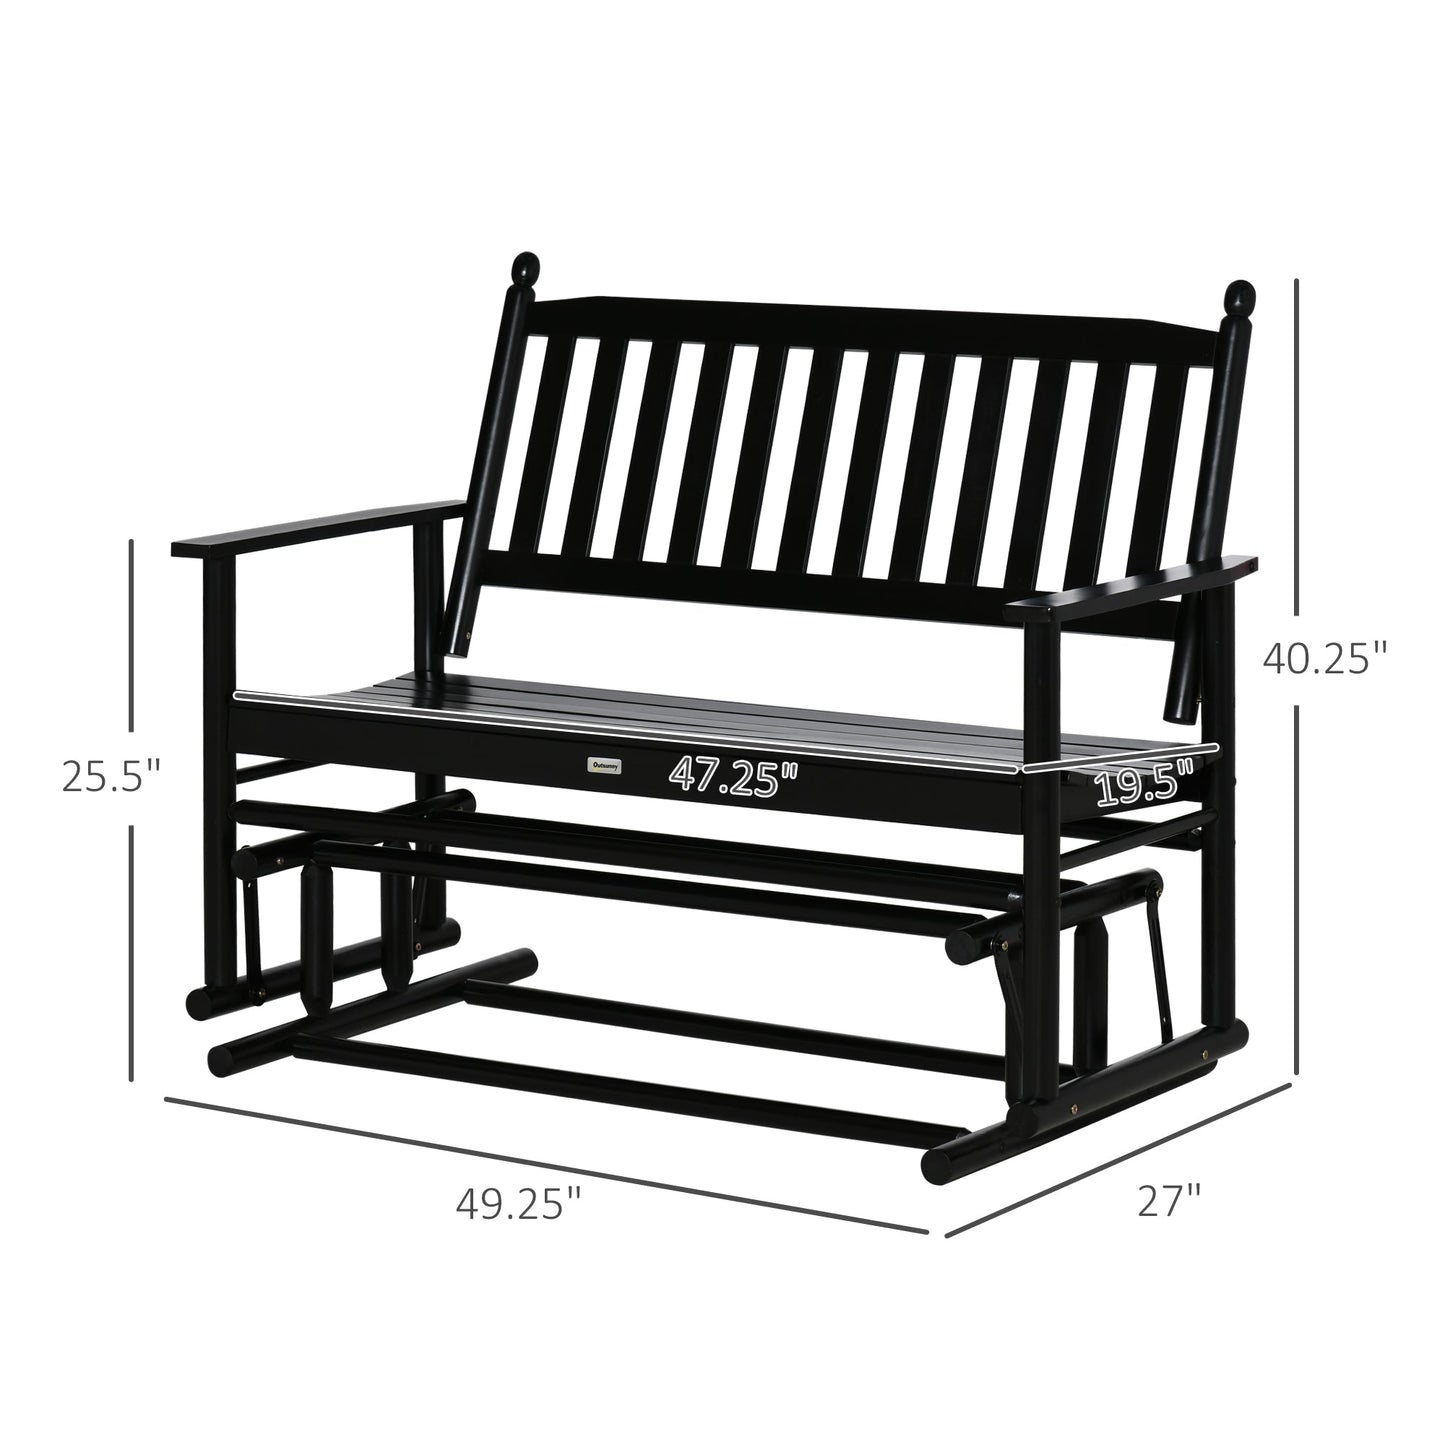 Outdoor and Garden-Patio Glider Bench Outdoor Swing Rocking Chair Loveseat with Sturdy Wooden Frame, Black - Outdoor Style Company